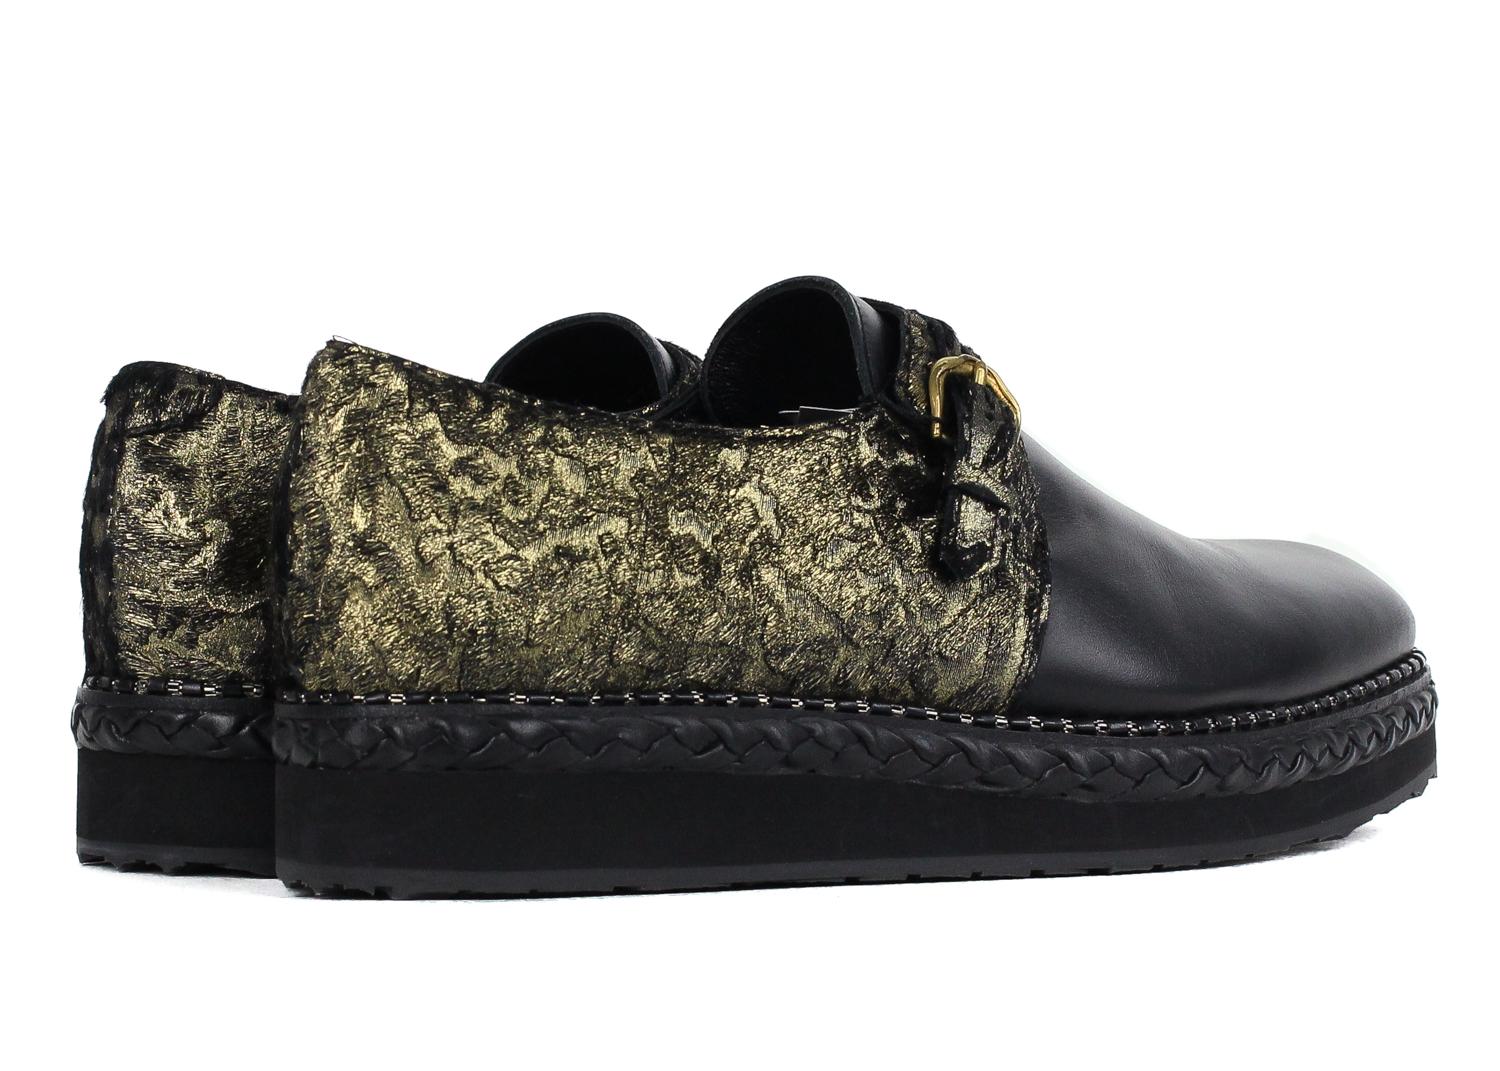 Roberto Cavalli Mens Gold Metallic Black Loafers In New Condition For Sale In Brooklyn, NY